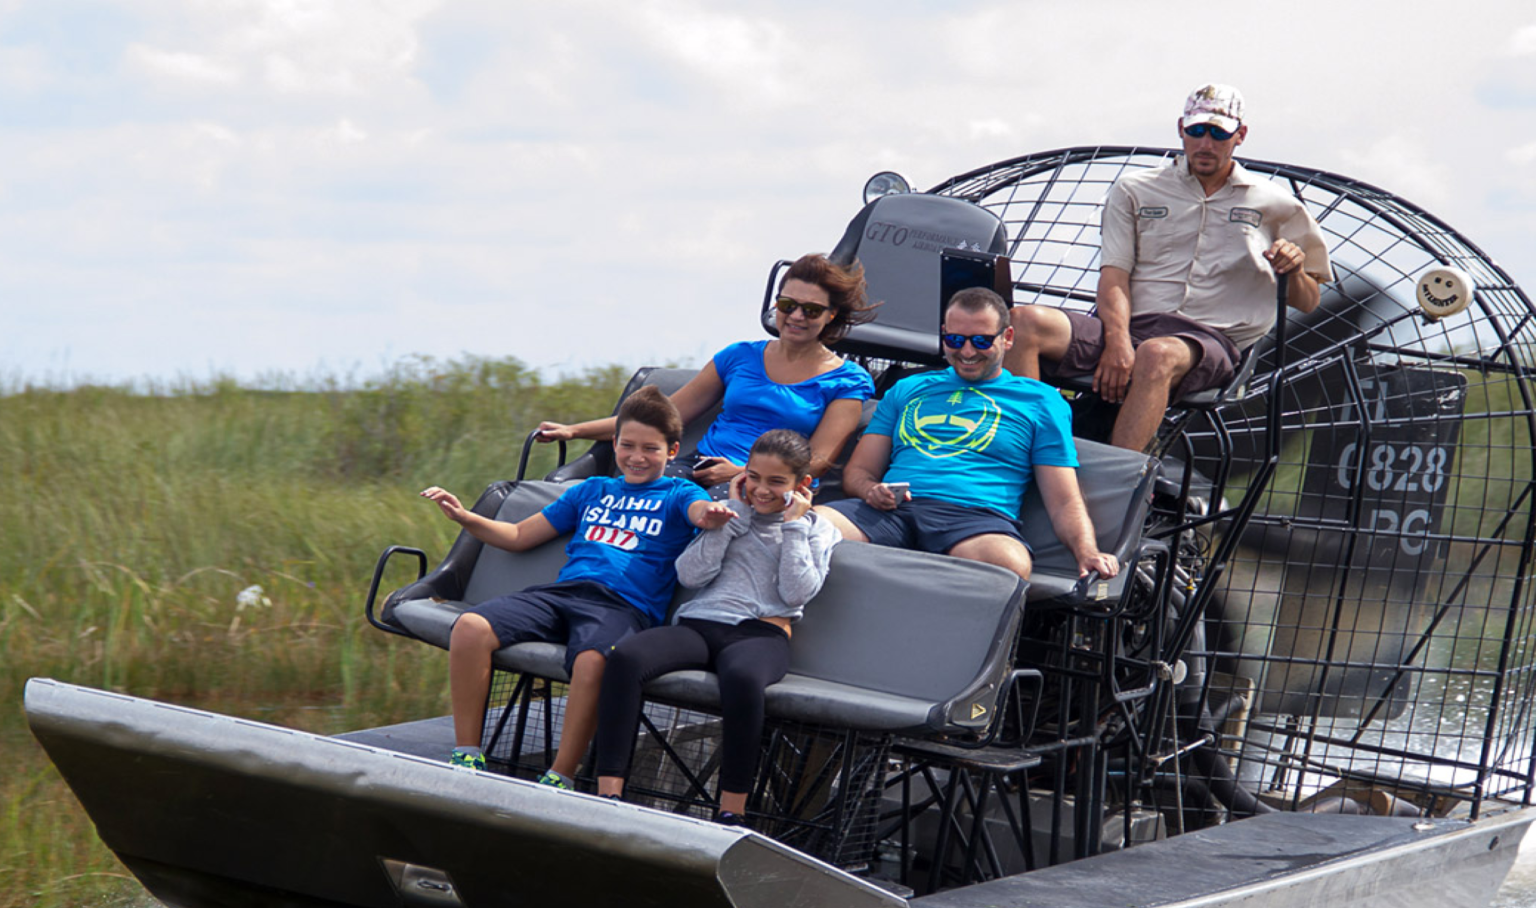 The History of ATVs and Airboats: A Miami Perspective